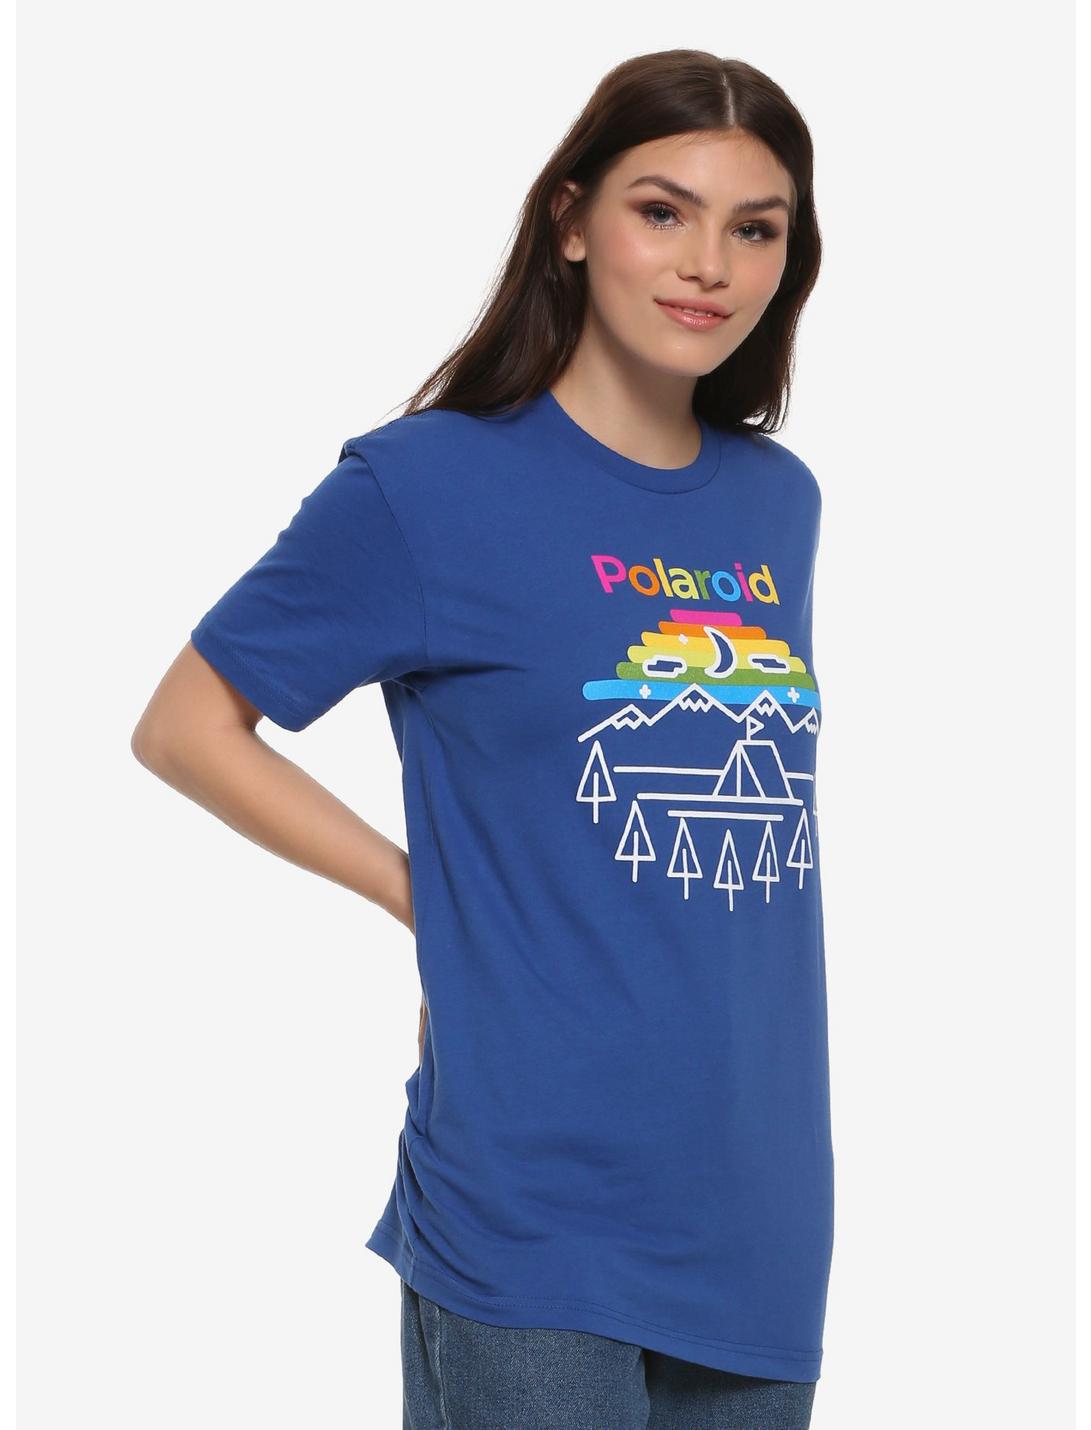 Polaroid Nature T-Shirt - BoxLunch Exclusive, BLUE, hi-res